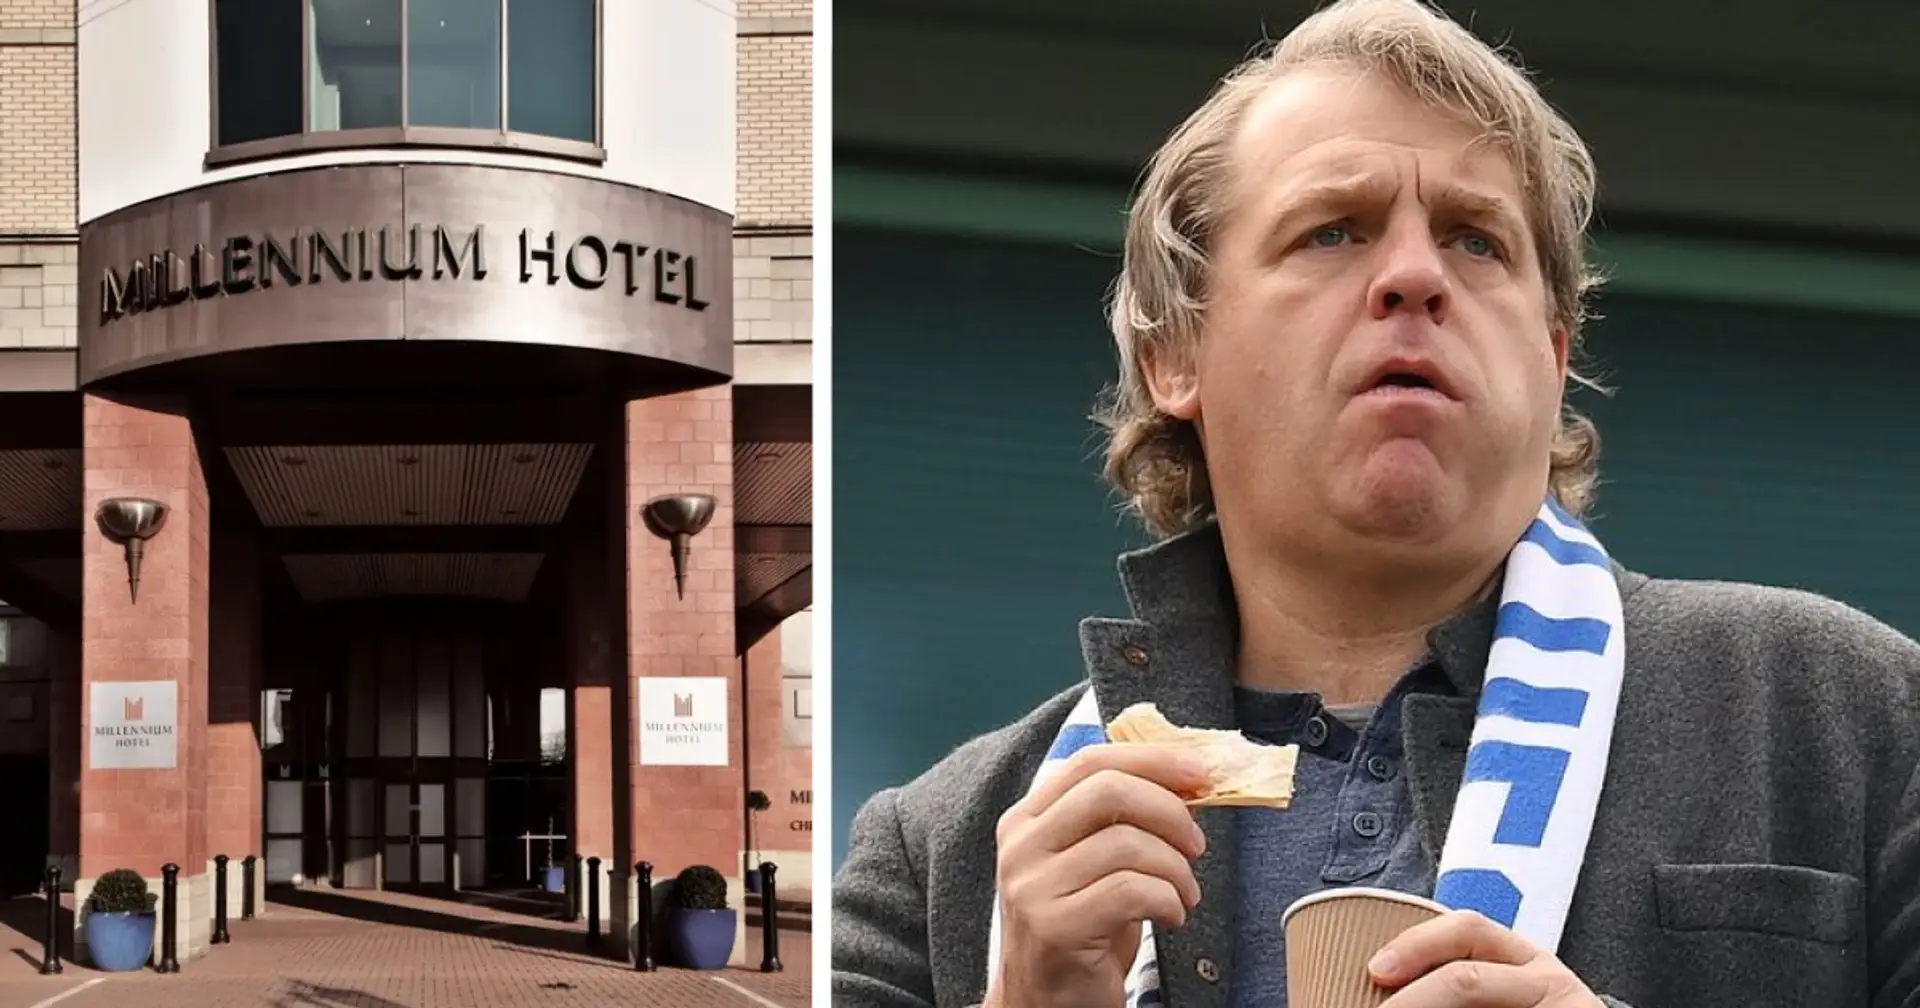 Chelsea suffer staggering £249m loss – try escaping punishment by selling Chelsea hotel